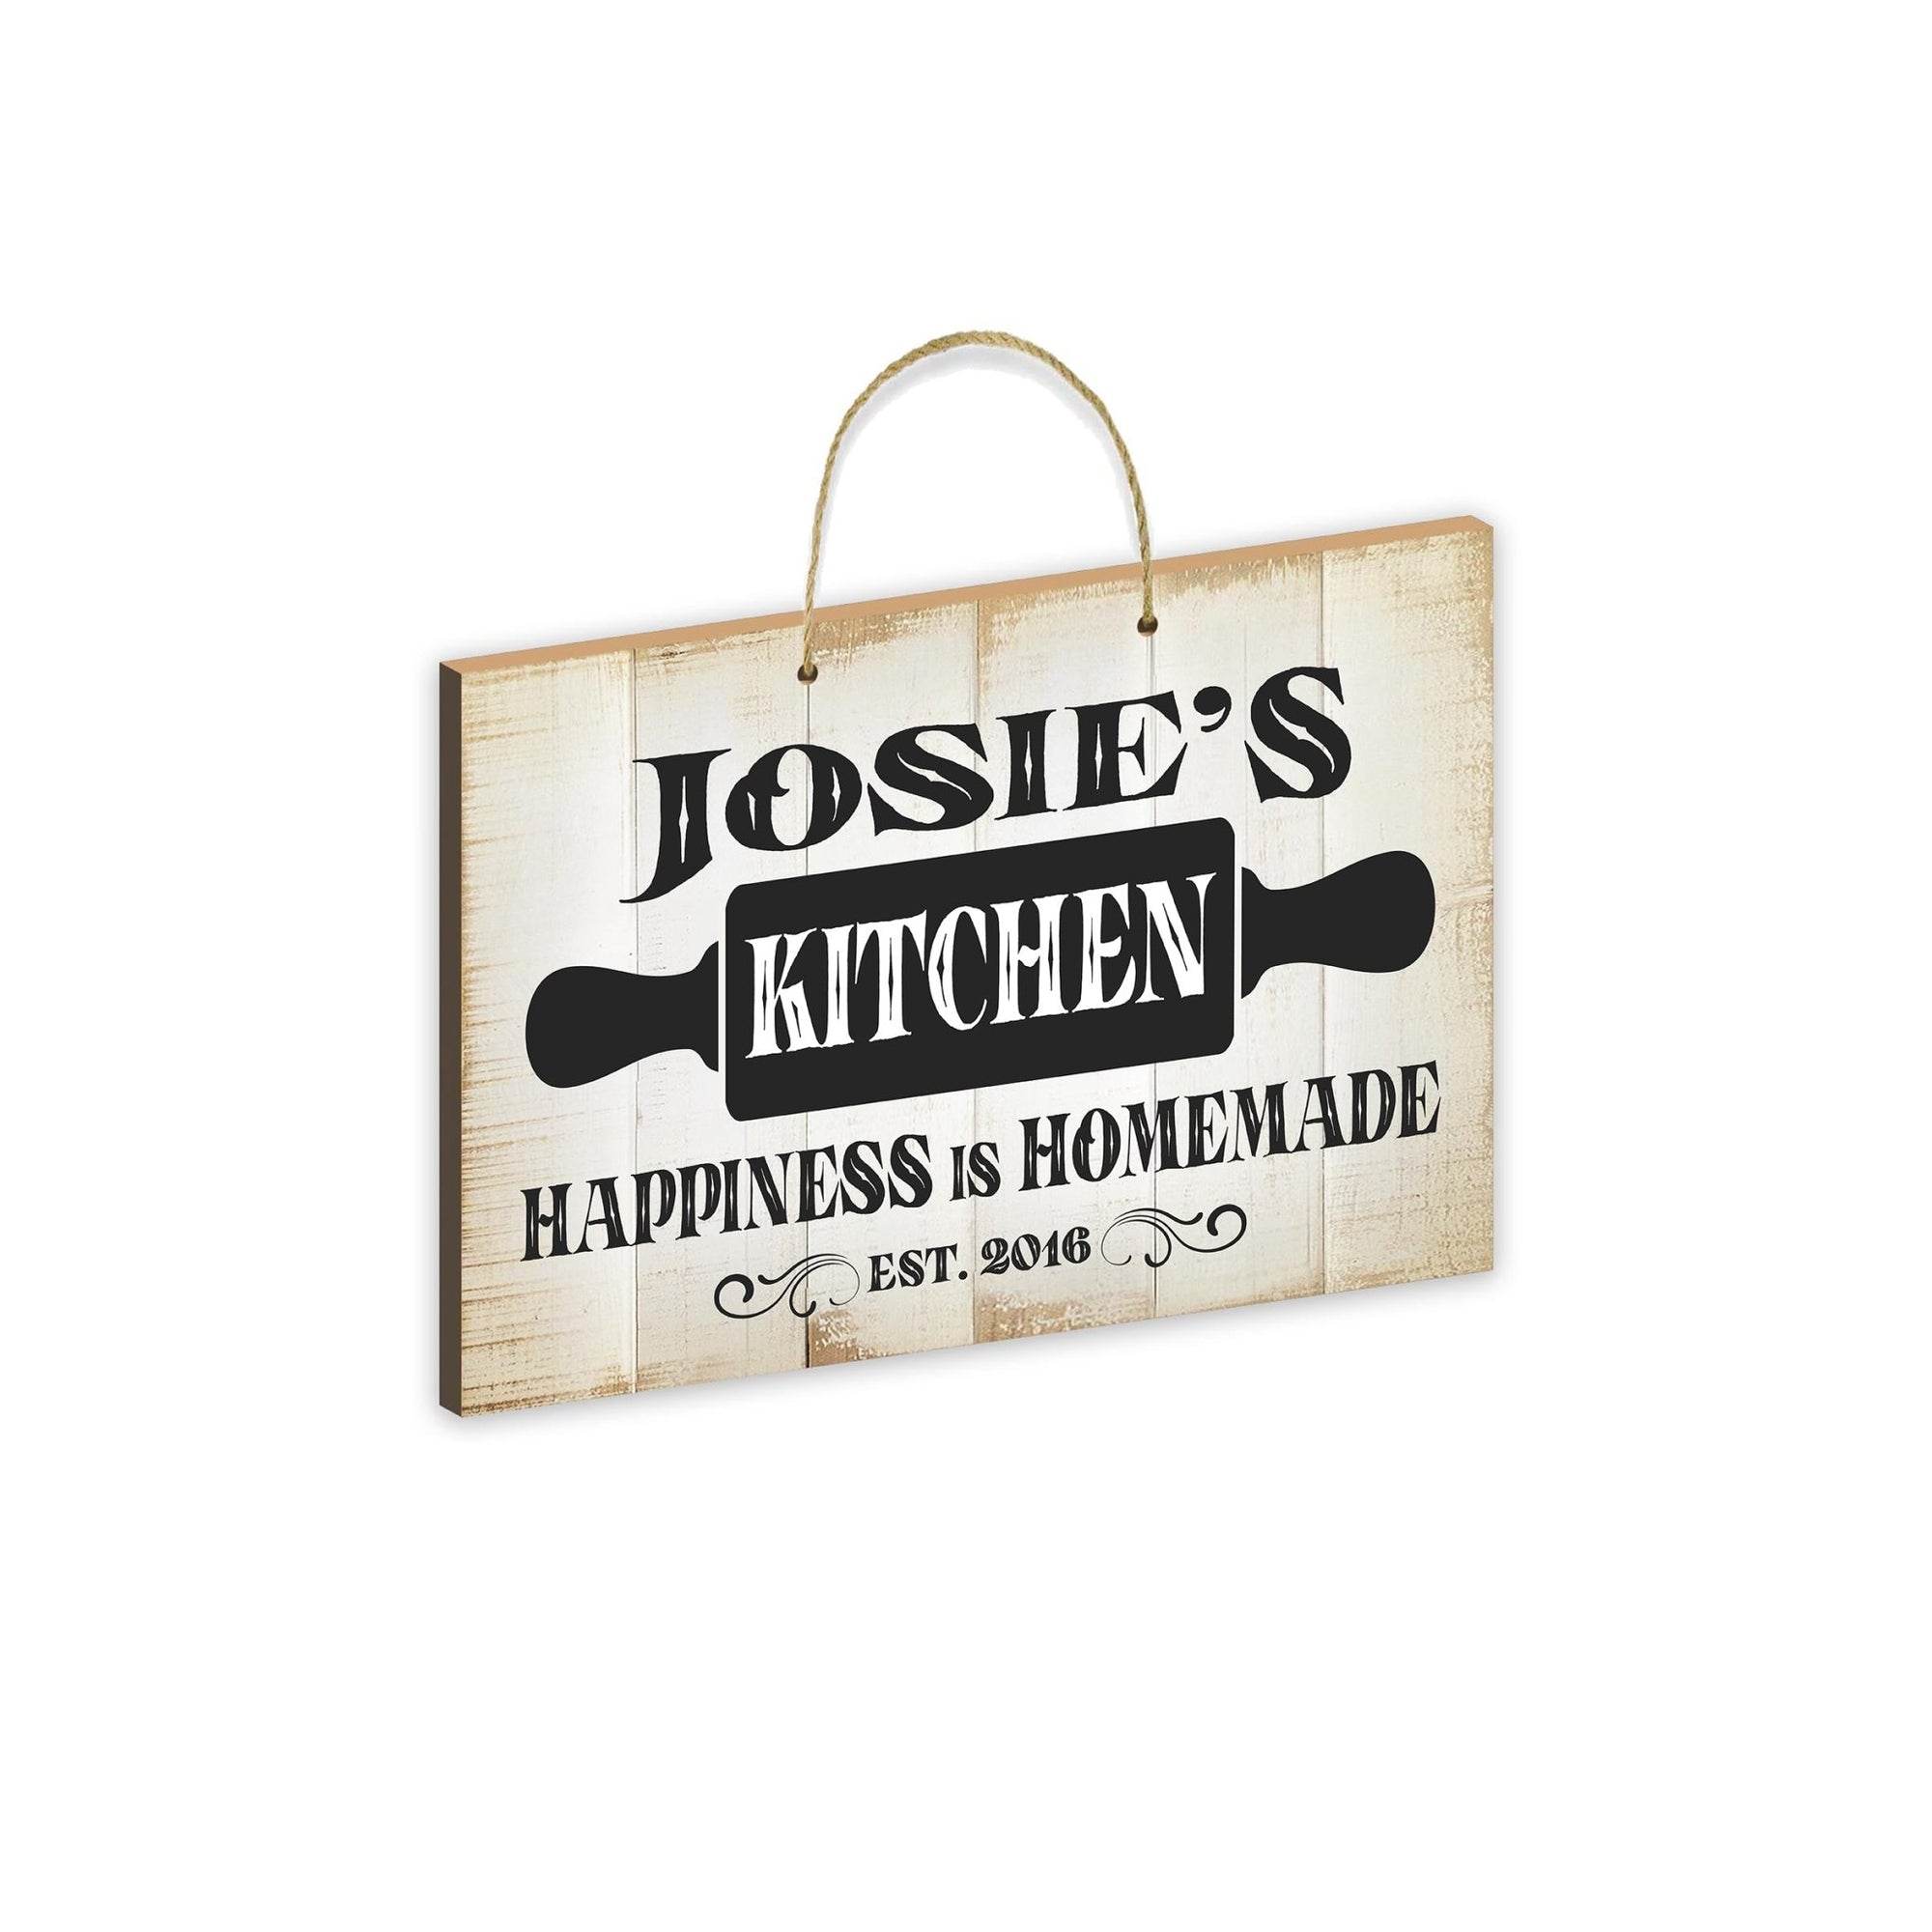 Inspirational Rustic Wooden Wall Hanging Rope Sign Kitchen Décor - Happiness Is Homemade [KITCHEN]